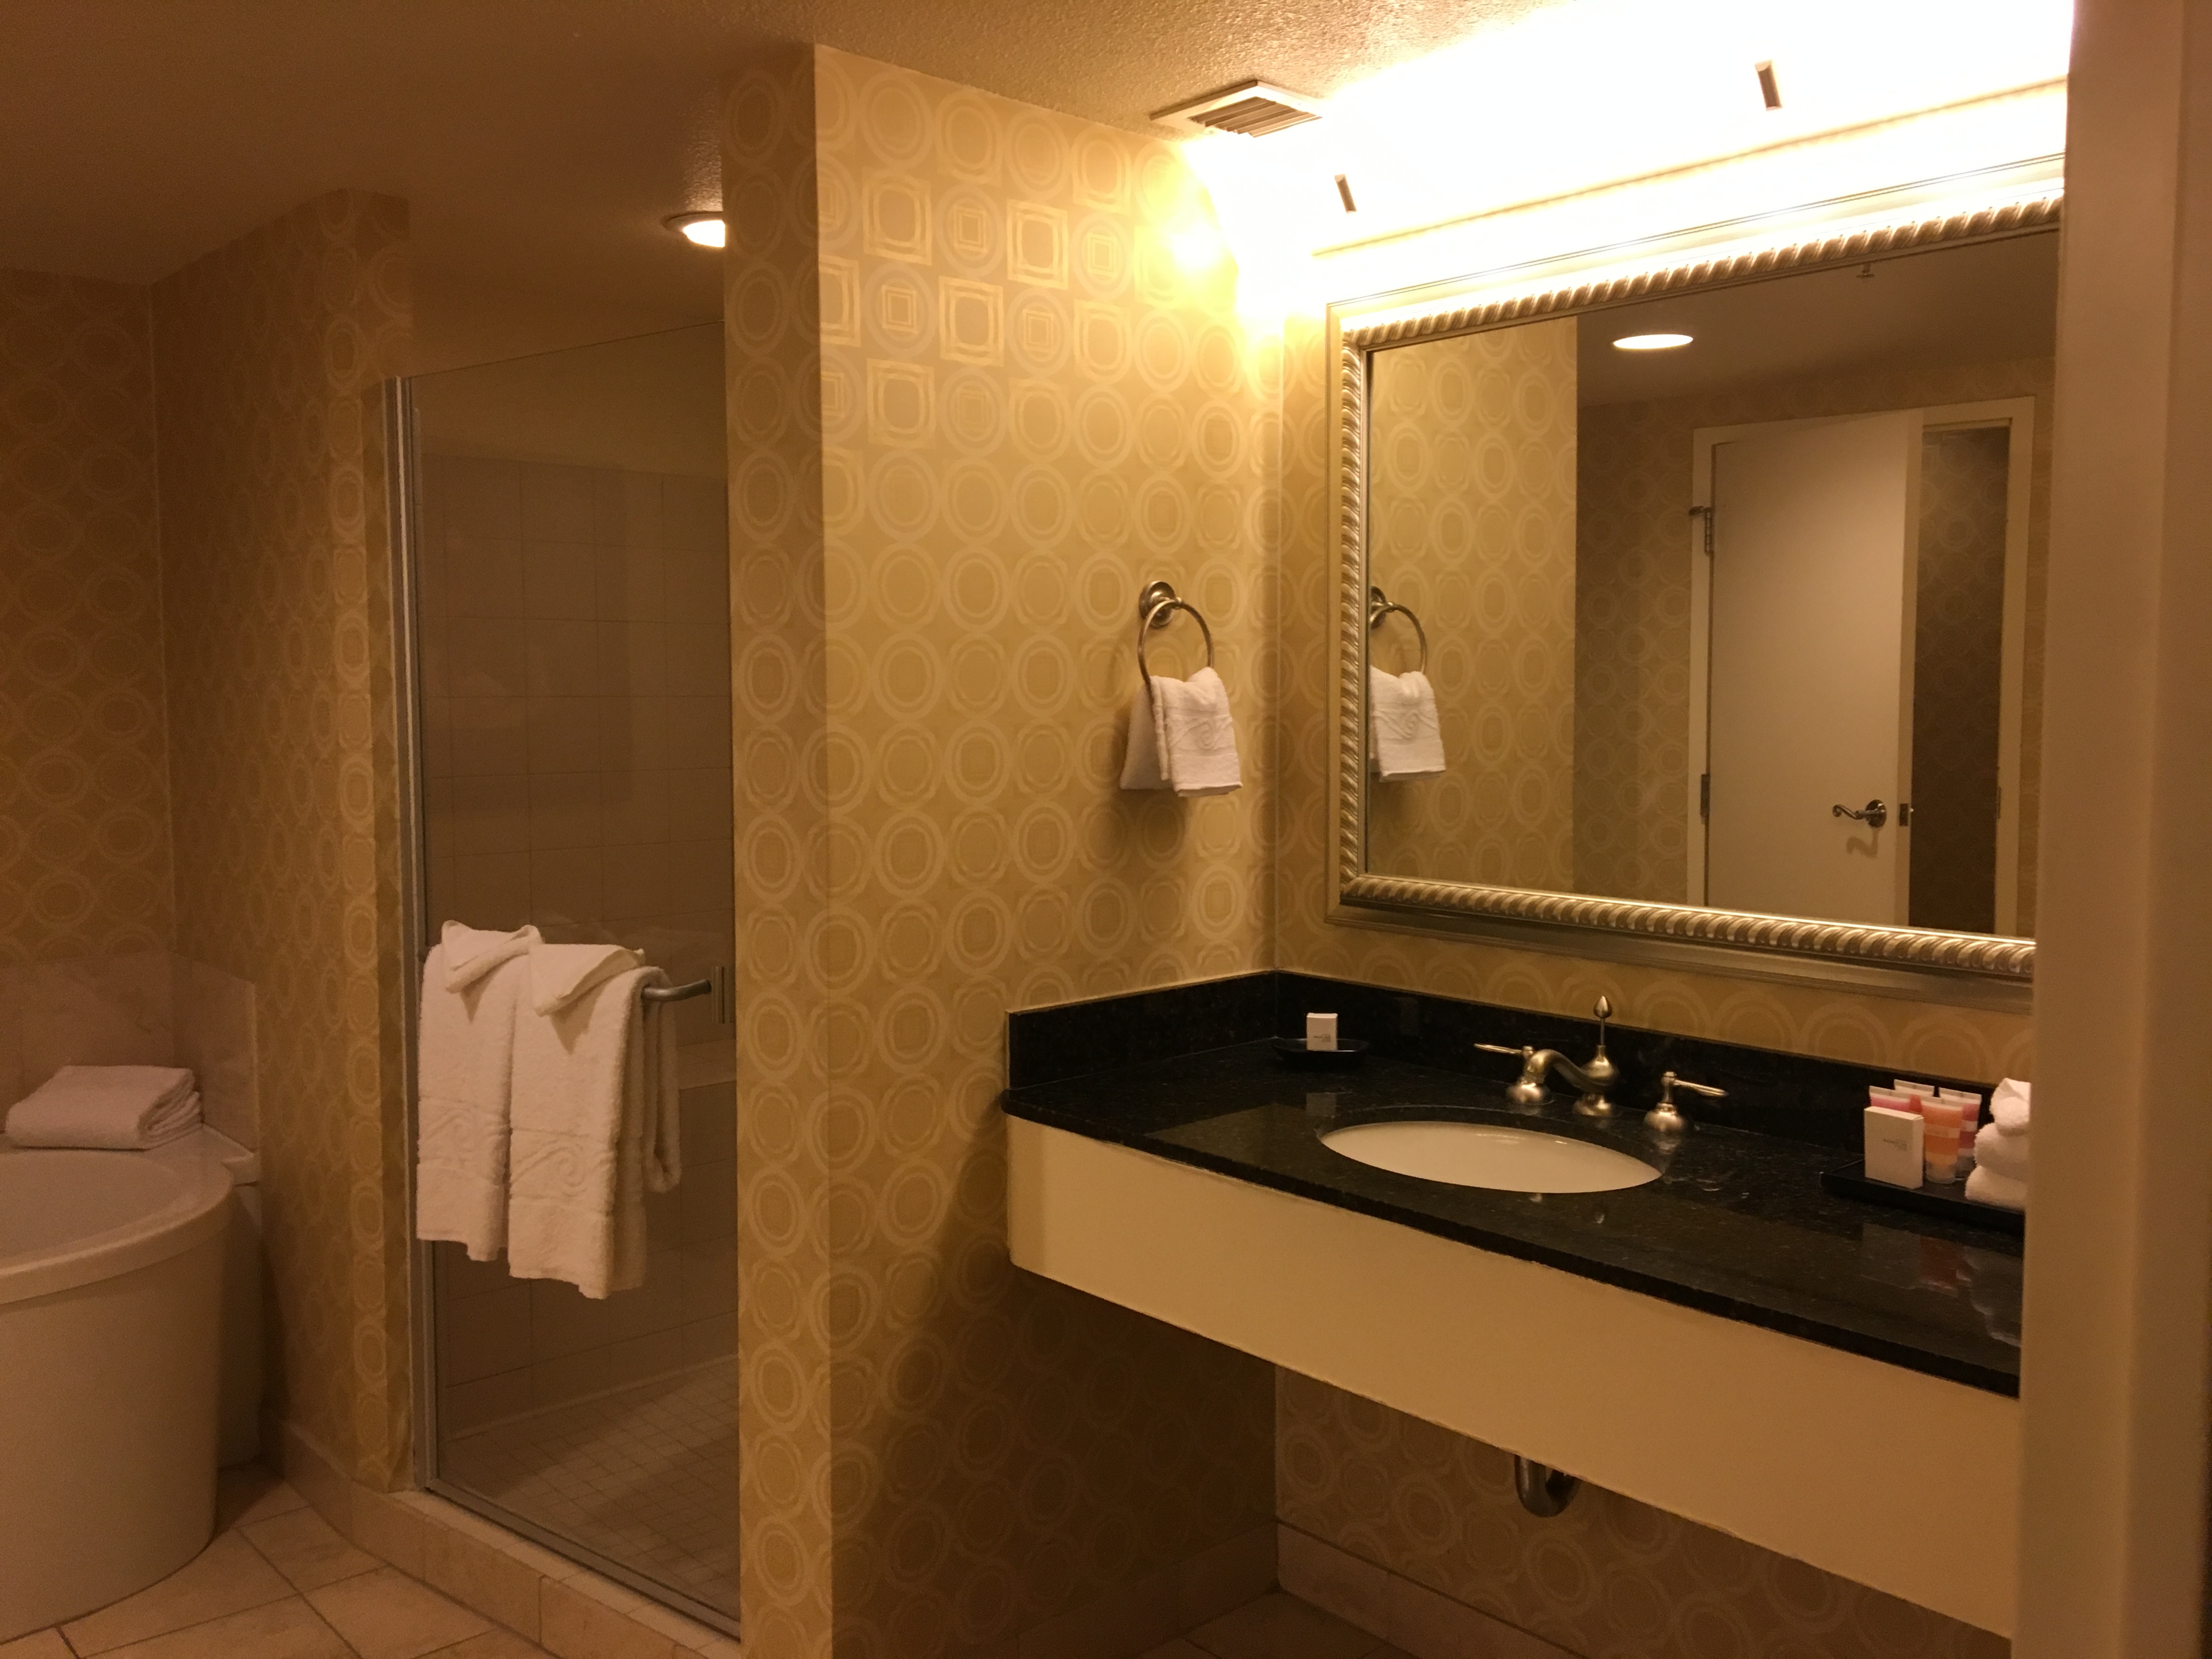 The view of one side of the Resort room bathroom